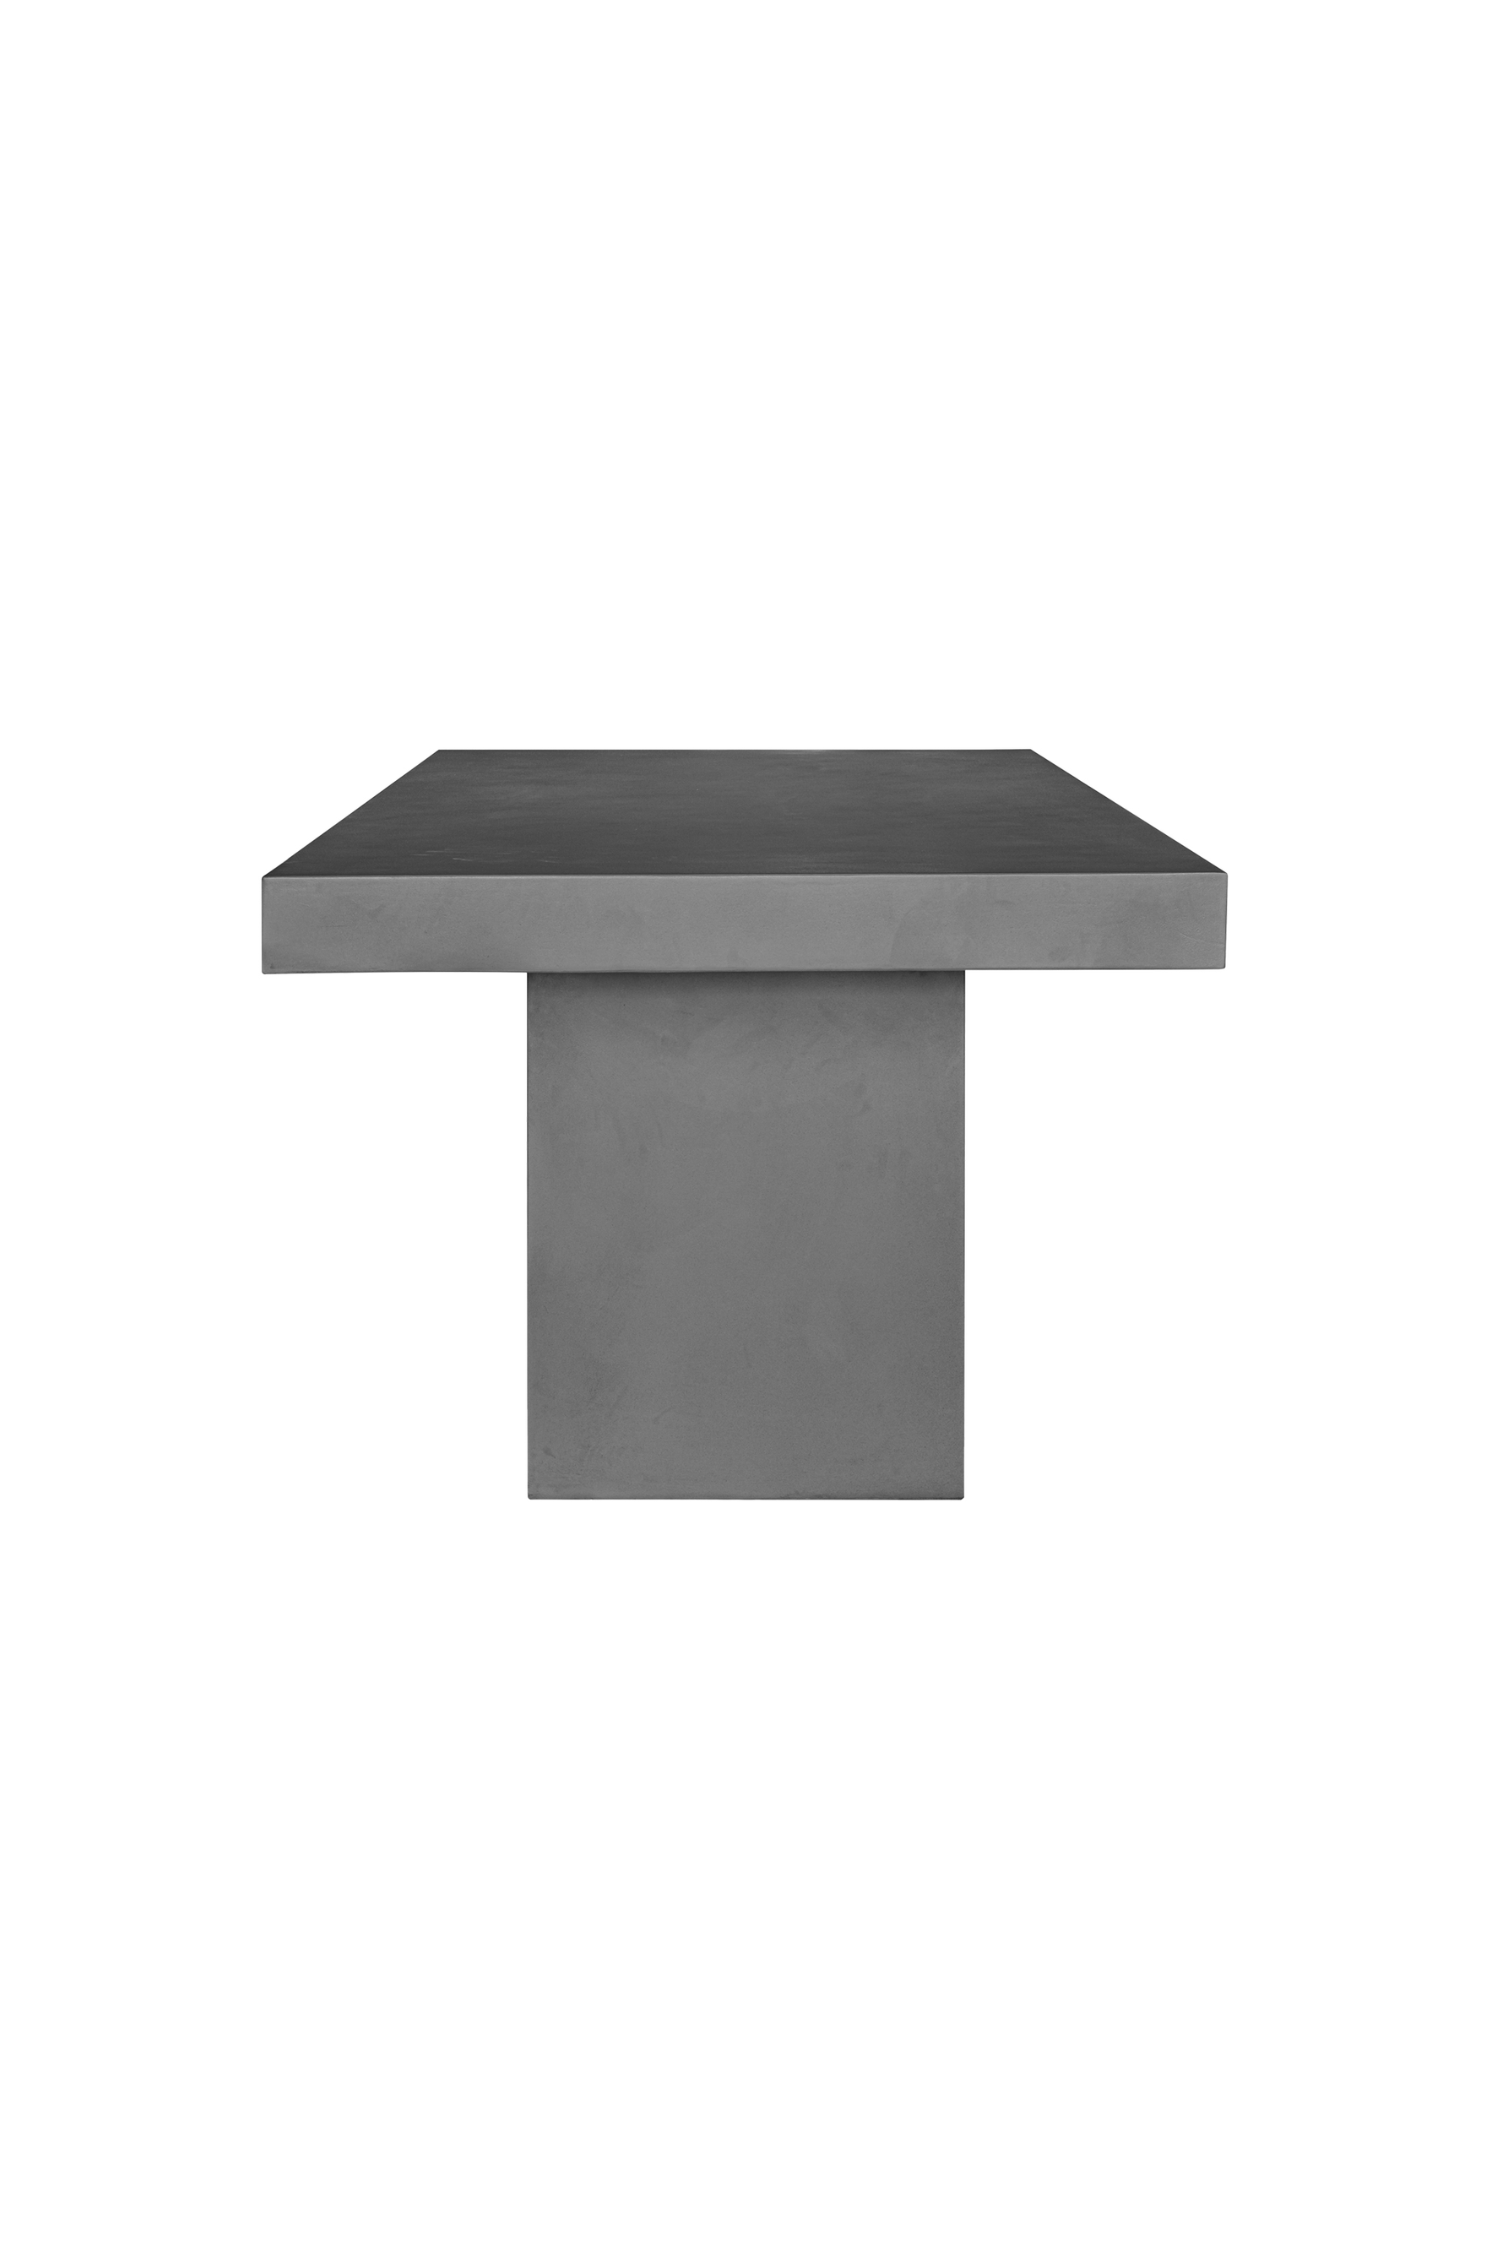 Olen Outdoor Dining Table